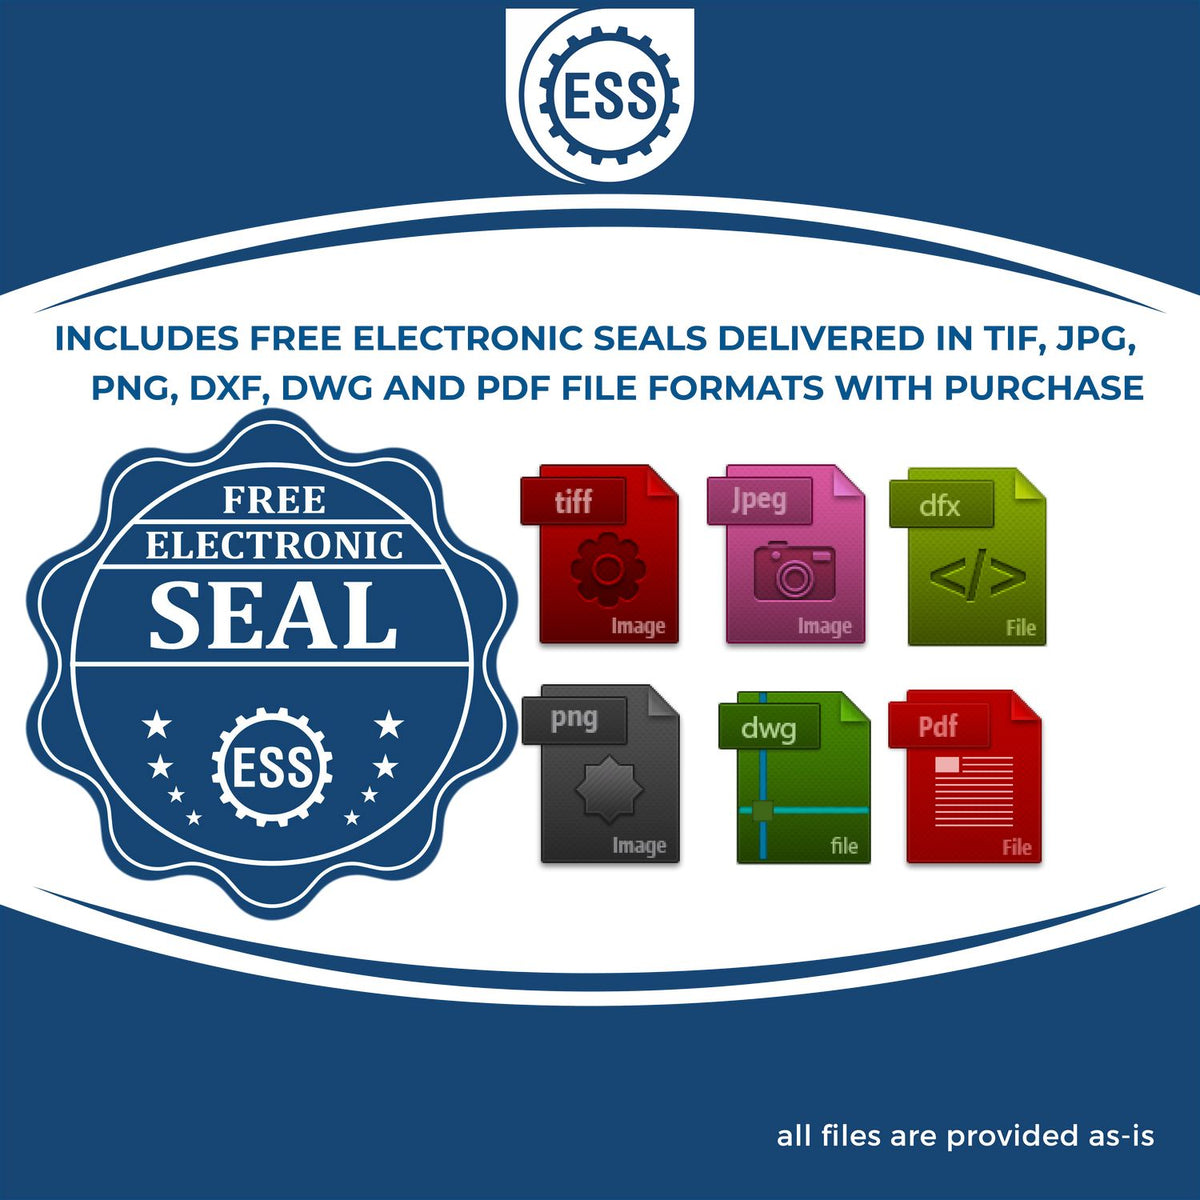 An infographic for the free electronic seal for the Heavy Duty Cast Iron Guam Land Surveyor Seal Embosser illustrating the different file type icons such as DXF, DWG, TIF, JPG and PNG.